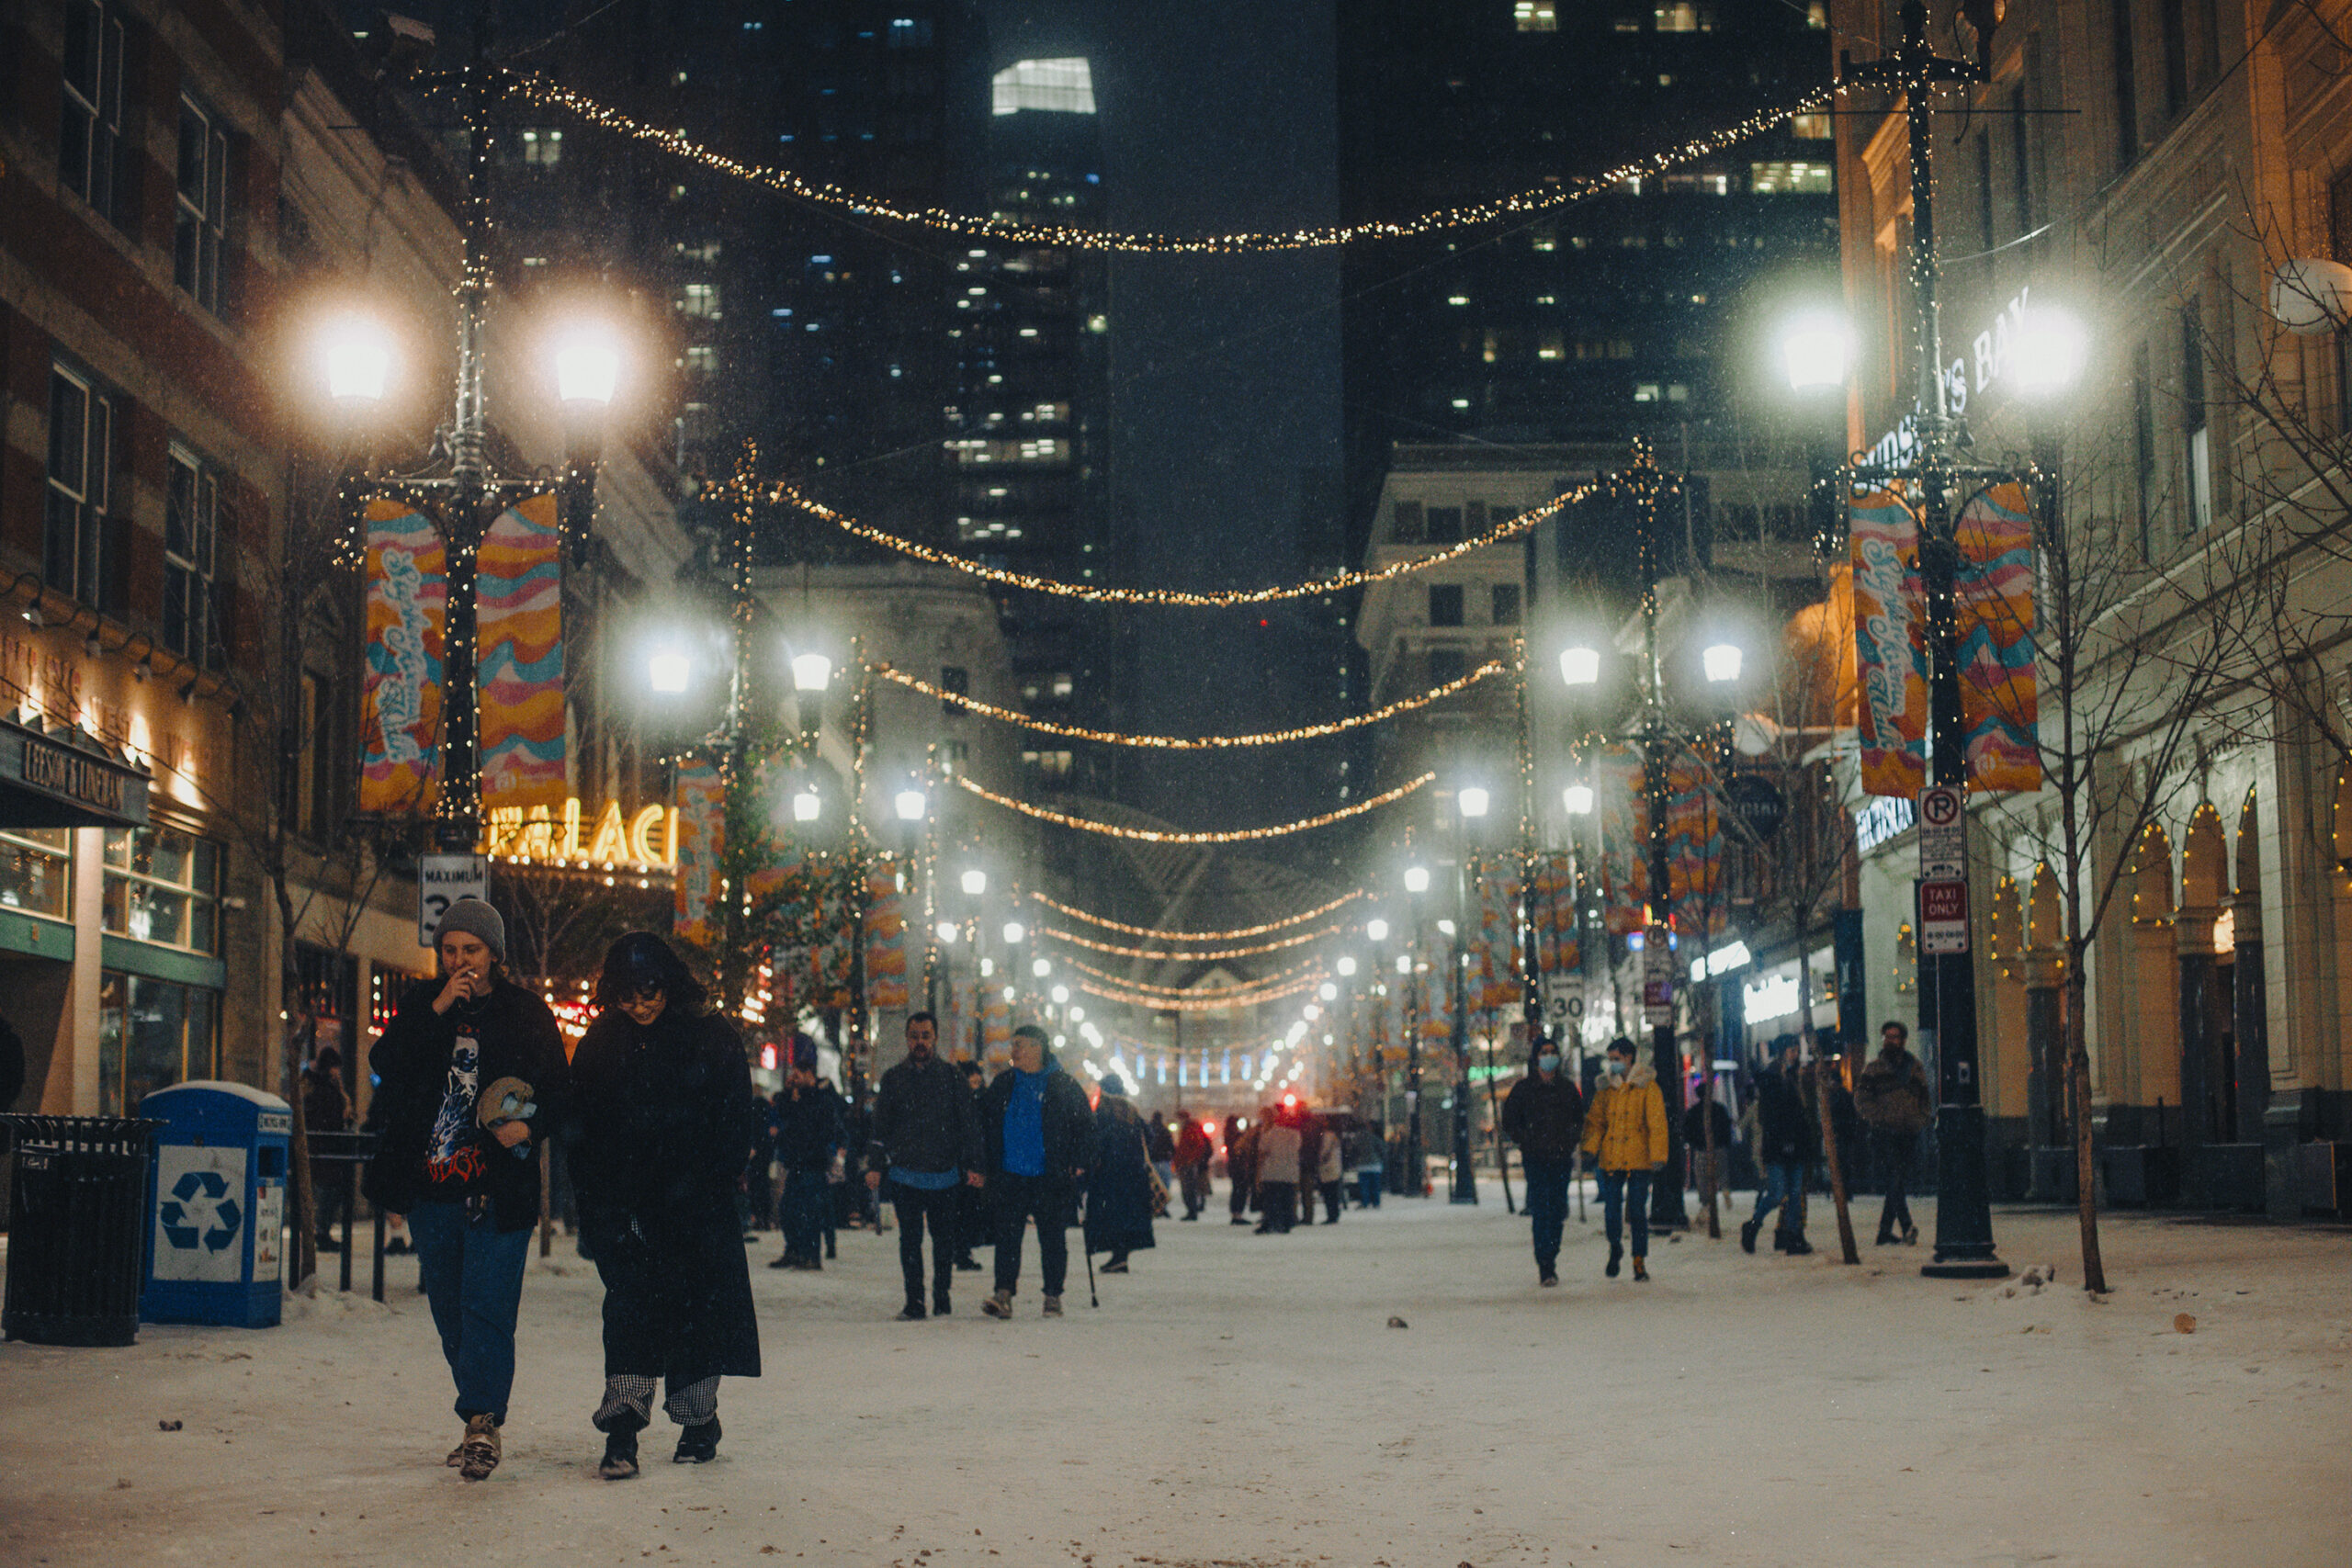 A snowy scene on Stephen Avenue in Calgary, Alberta as patrons walk to and from The Palace Theatre underneath hazy street lights.